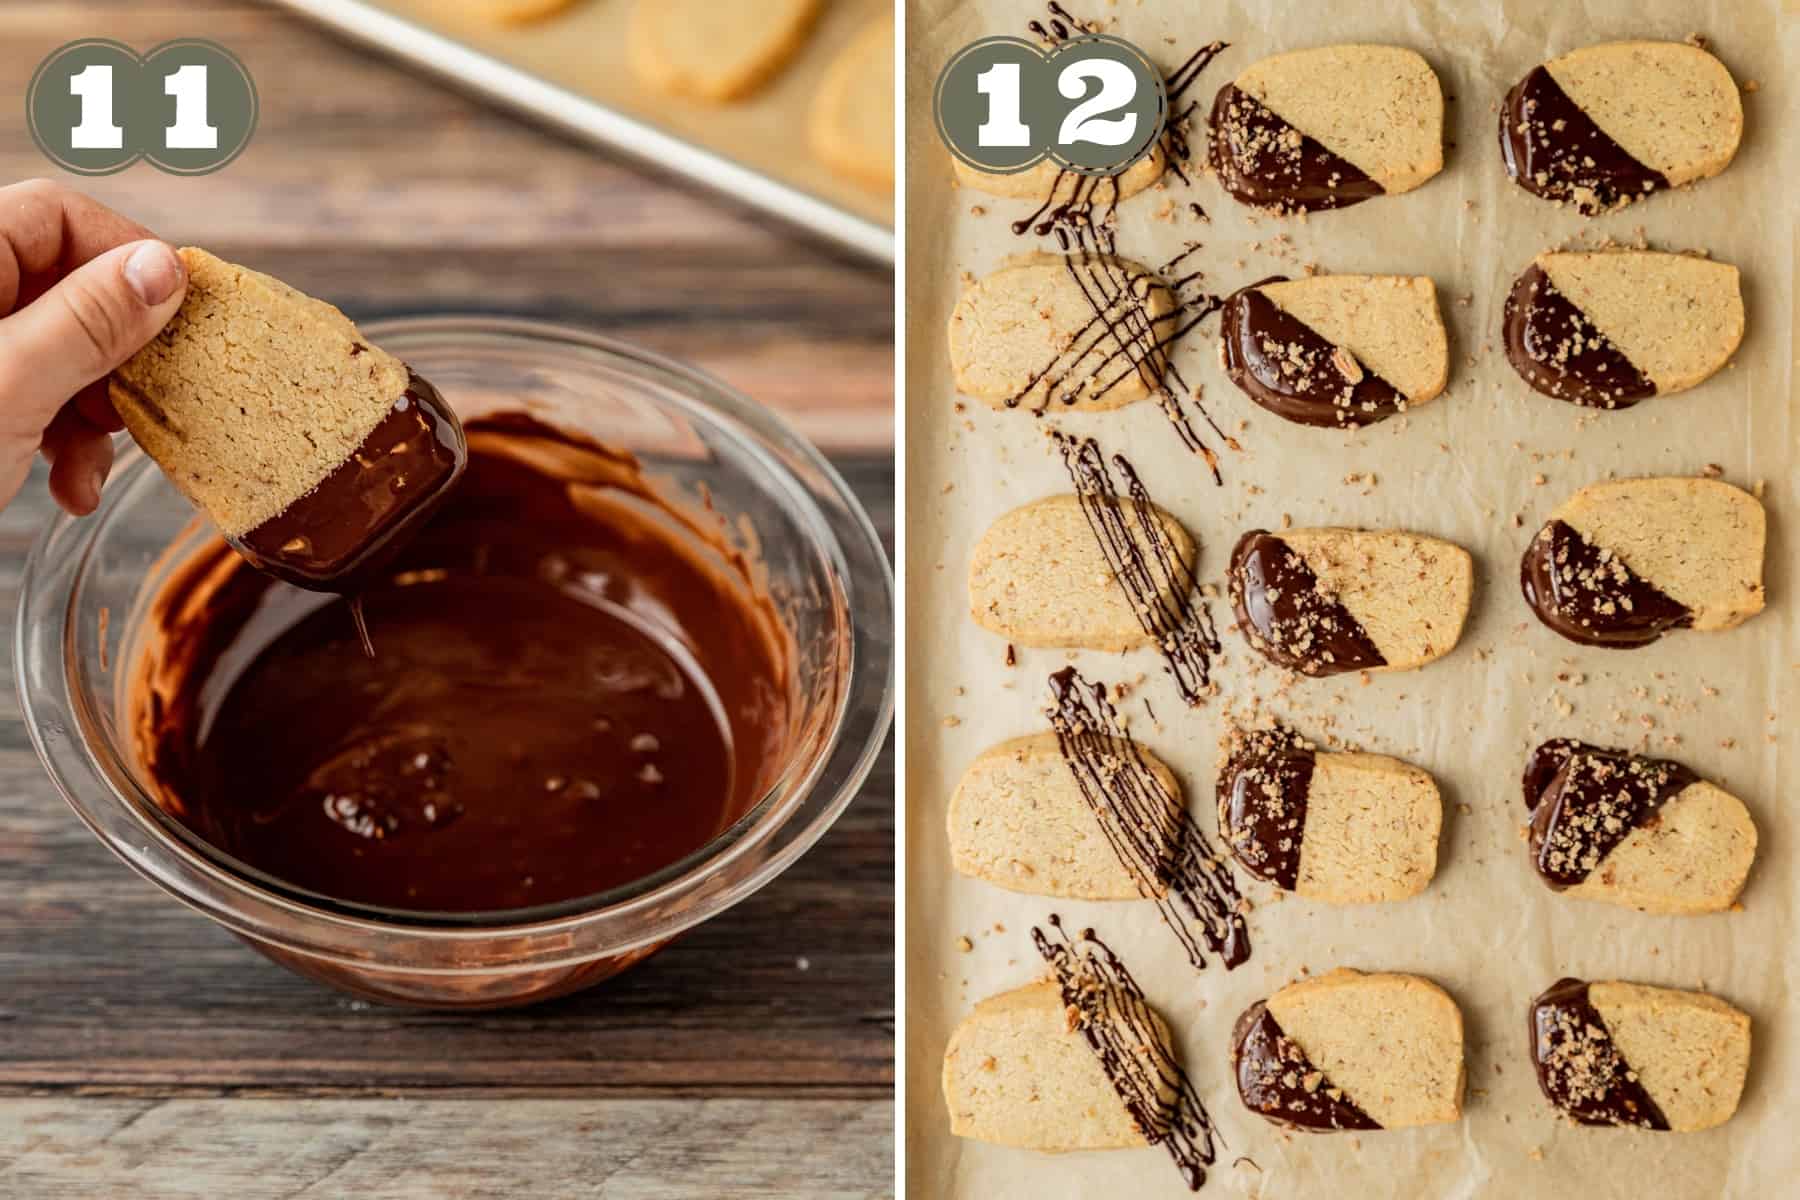 Side by side process shots for shortbread cookies including dipping cookies into melted chocolate and laying flat on a baking sheet.